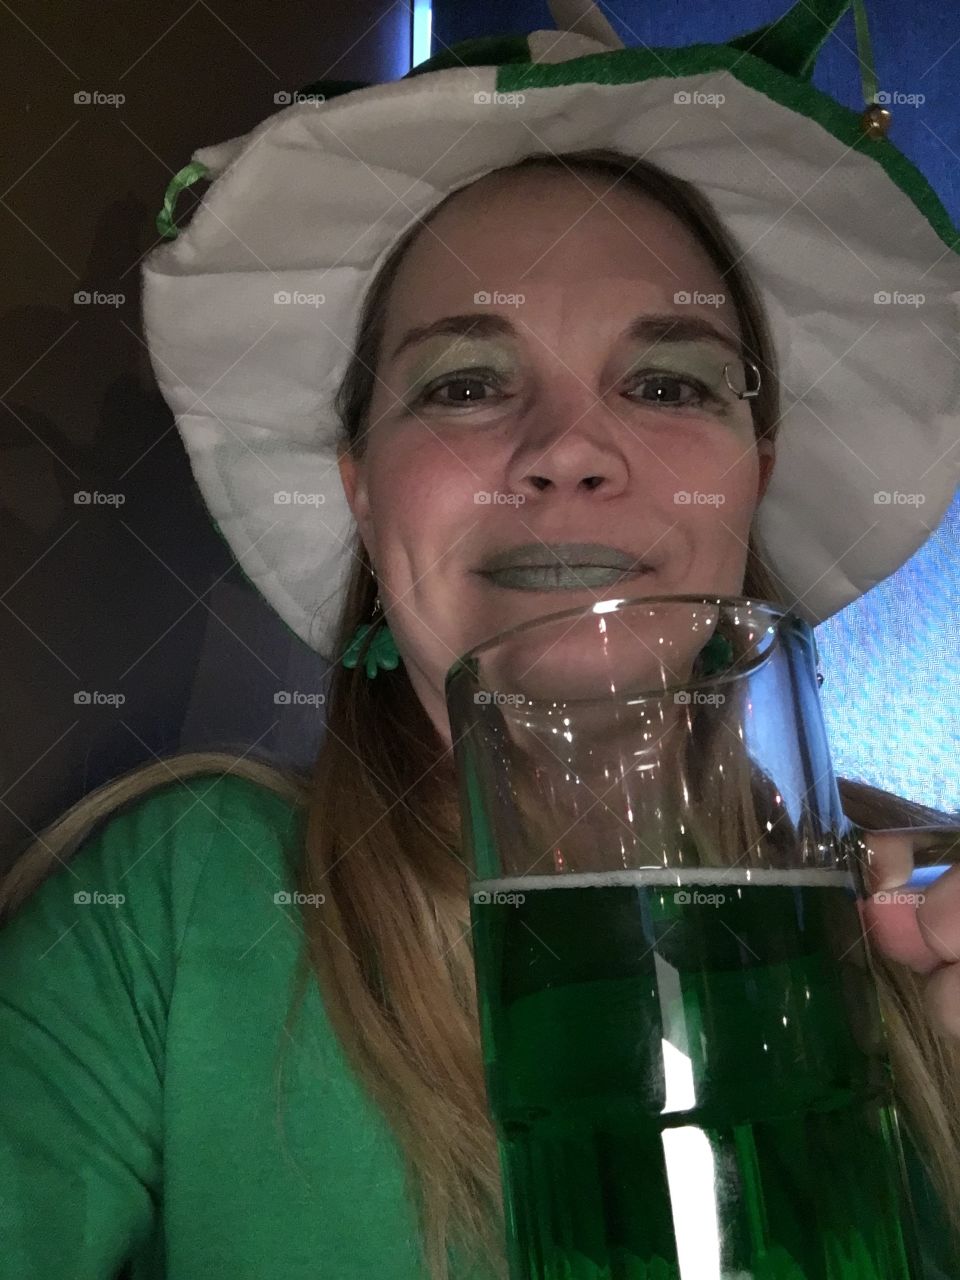 Drinking green beer on saint Patrick’s Day 